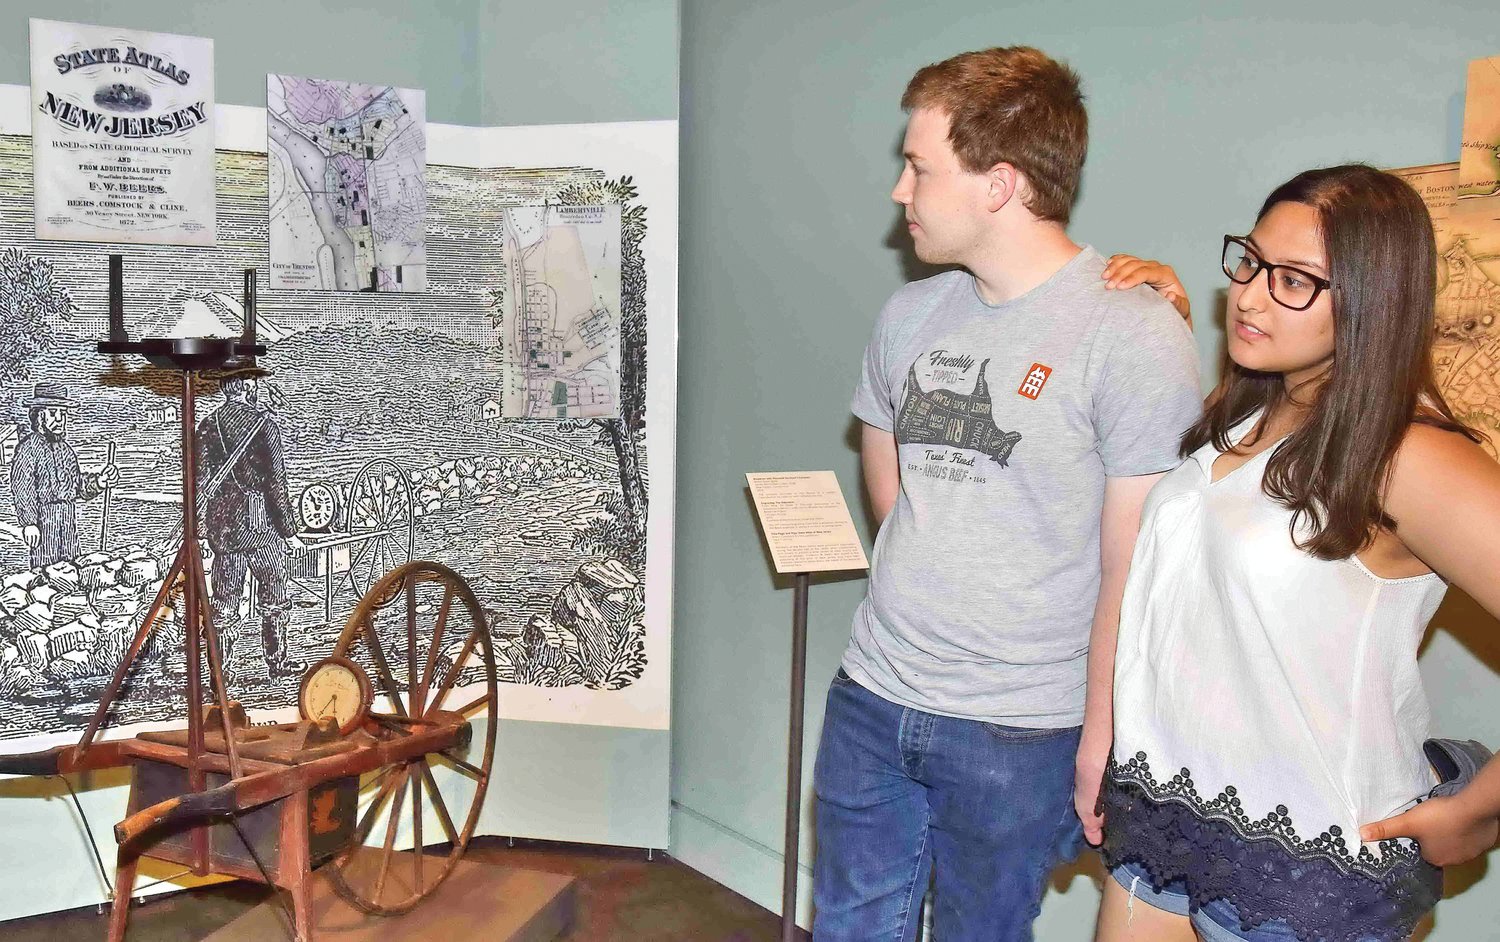 Luke Mueller-Odem and Olivia Dossa view an early New Jersey map and measuring device.